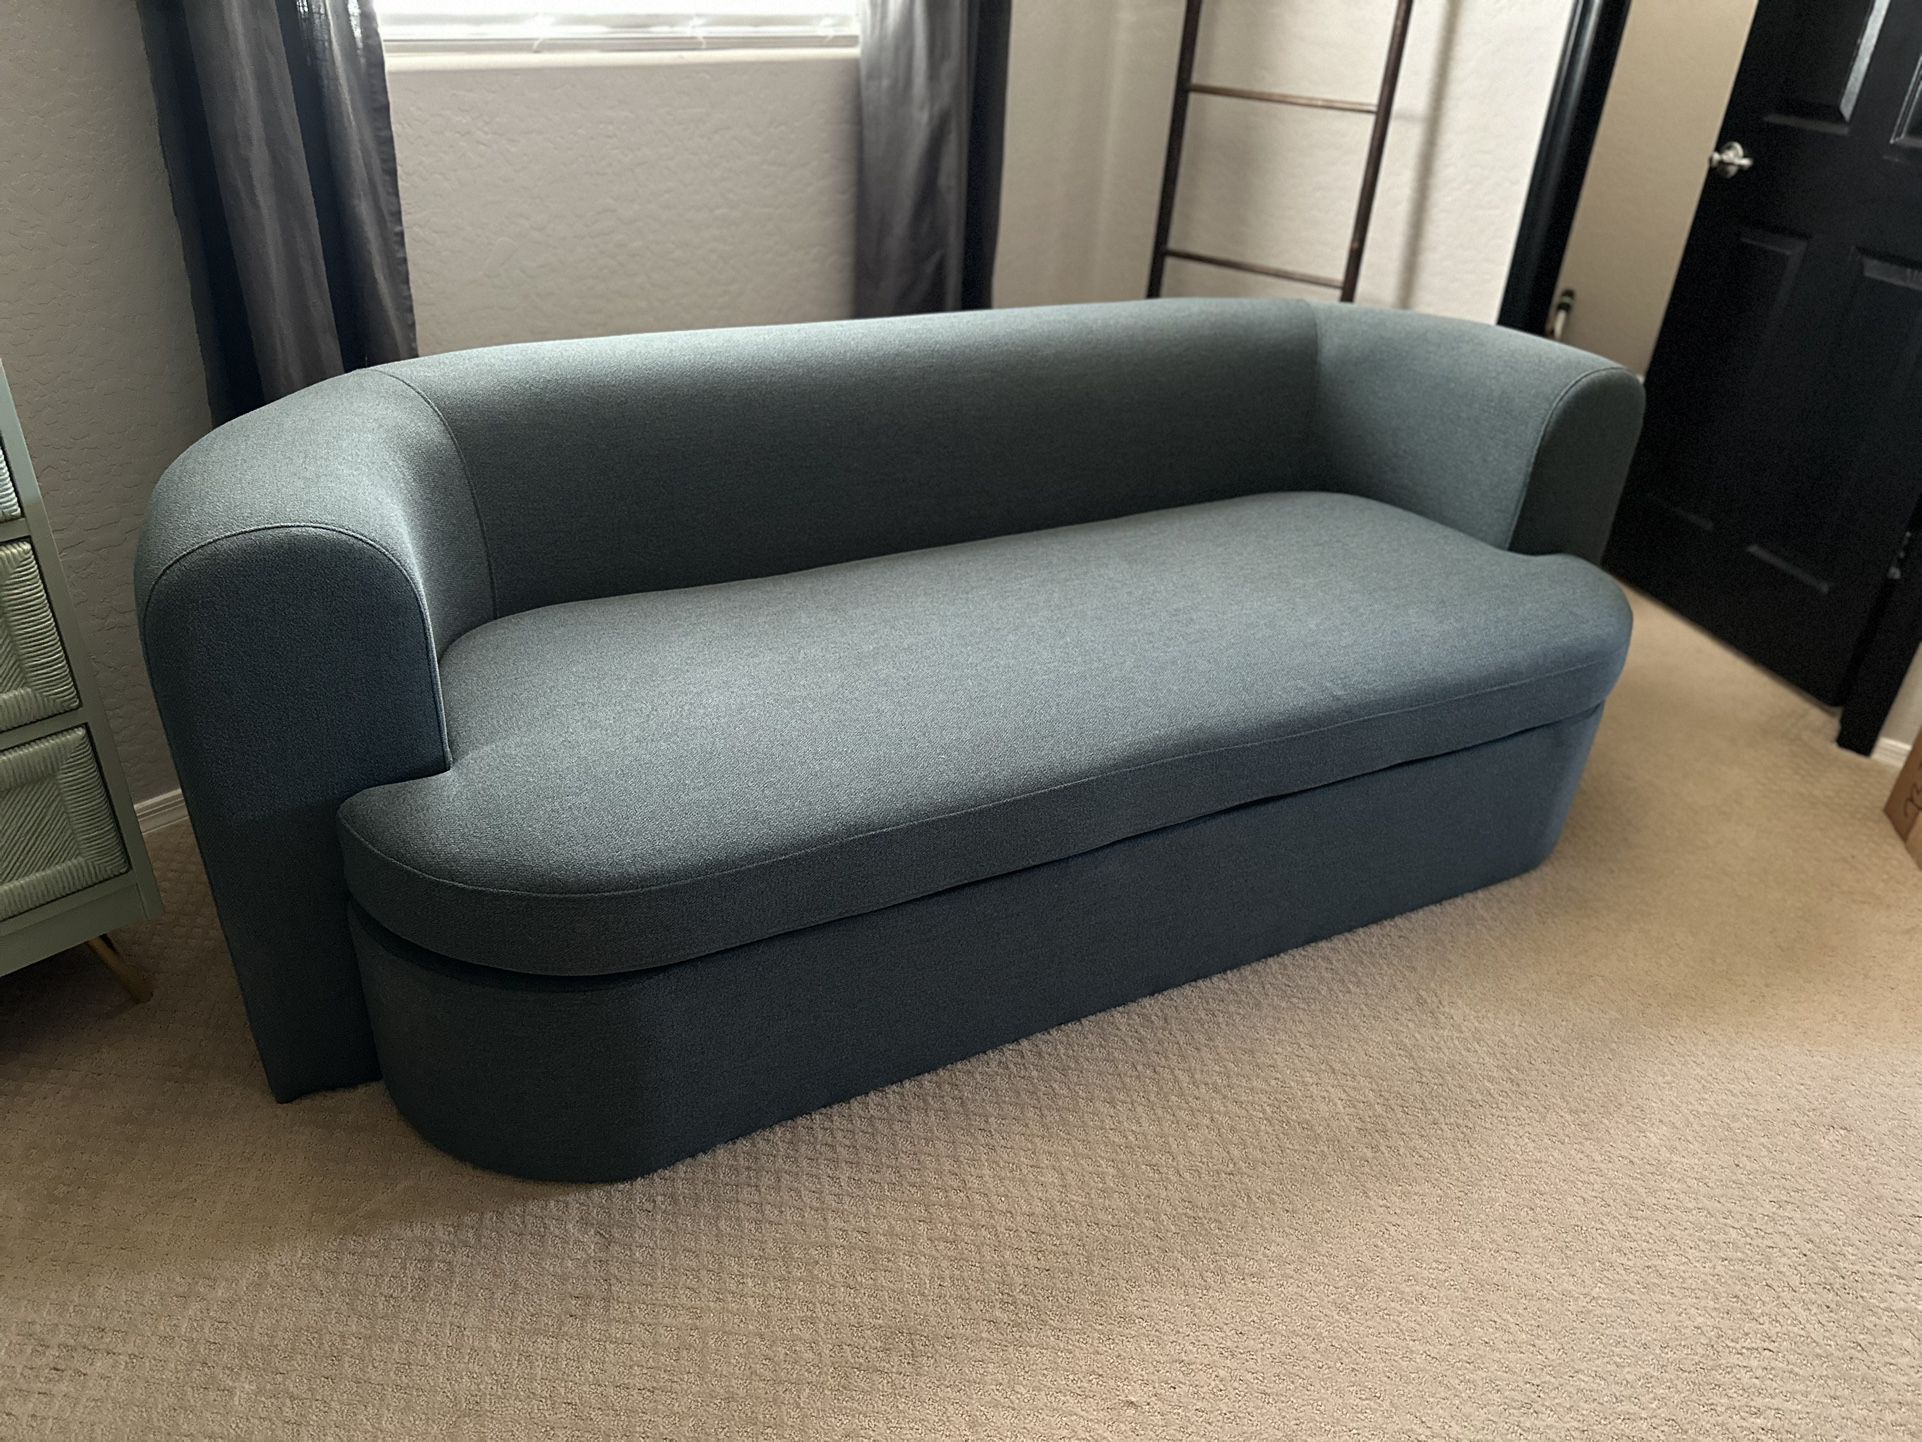 Urban Outfitters Couch - Brand New for Sale in Phoenix, AZ - OfferUp